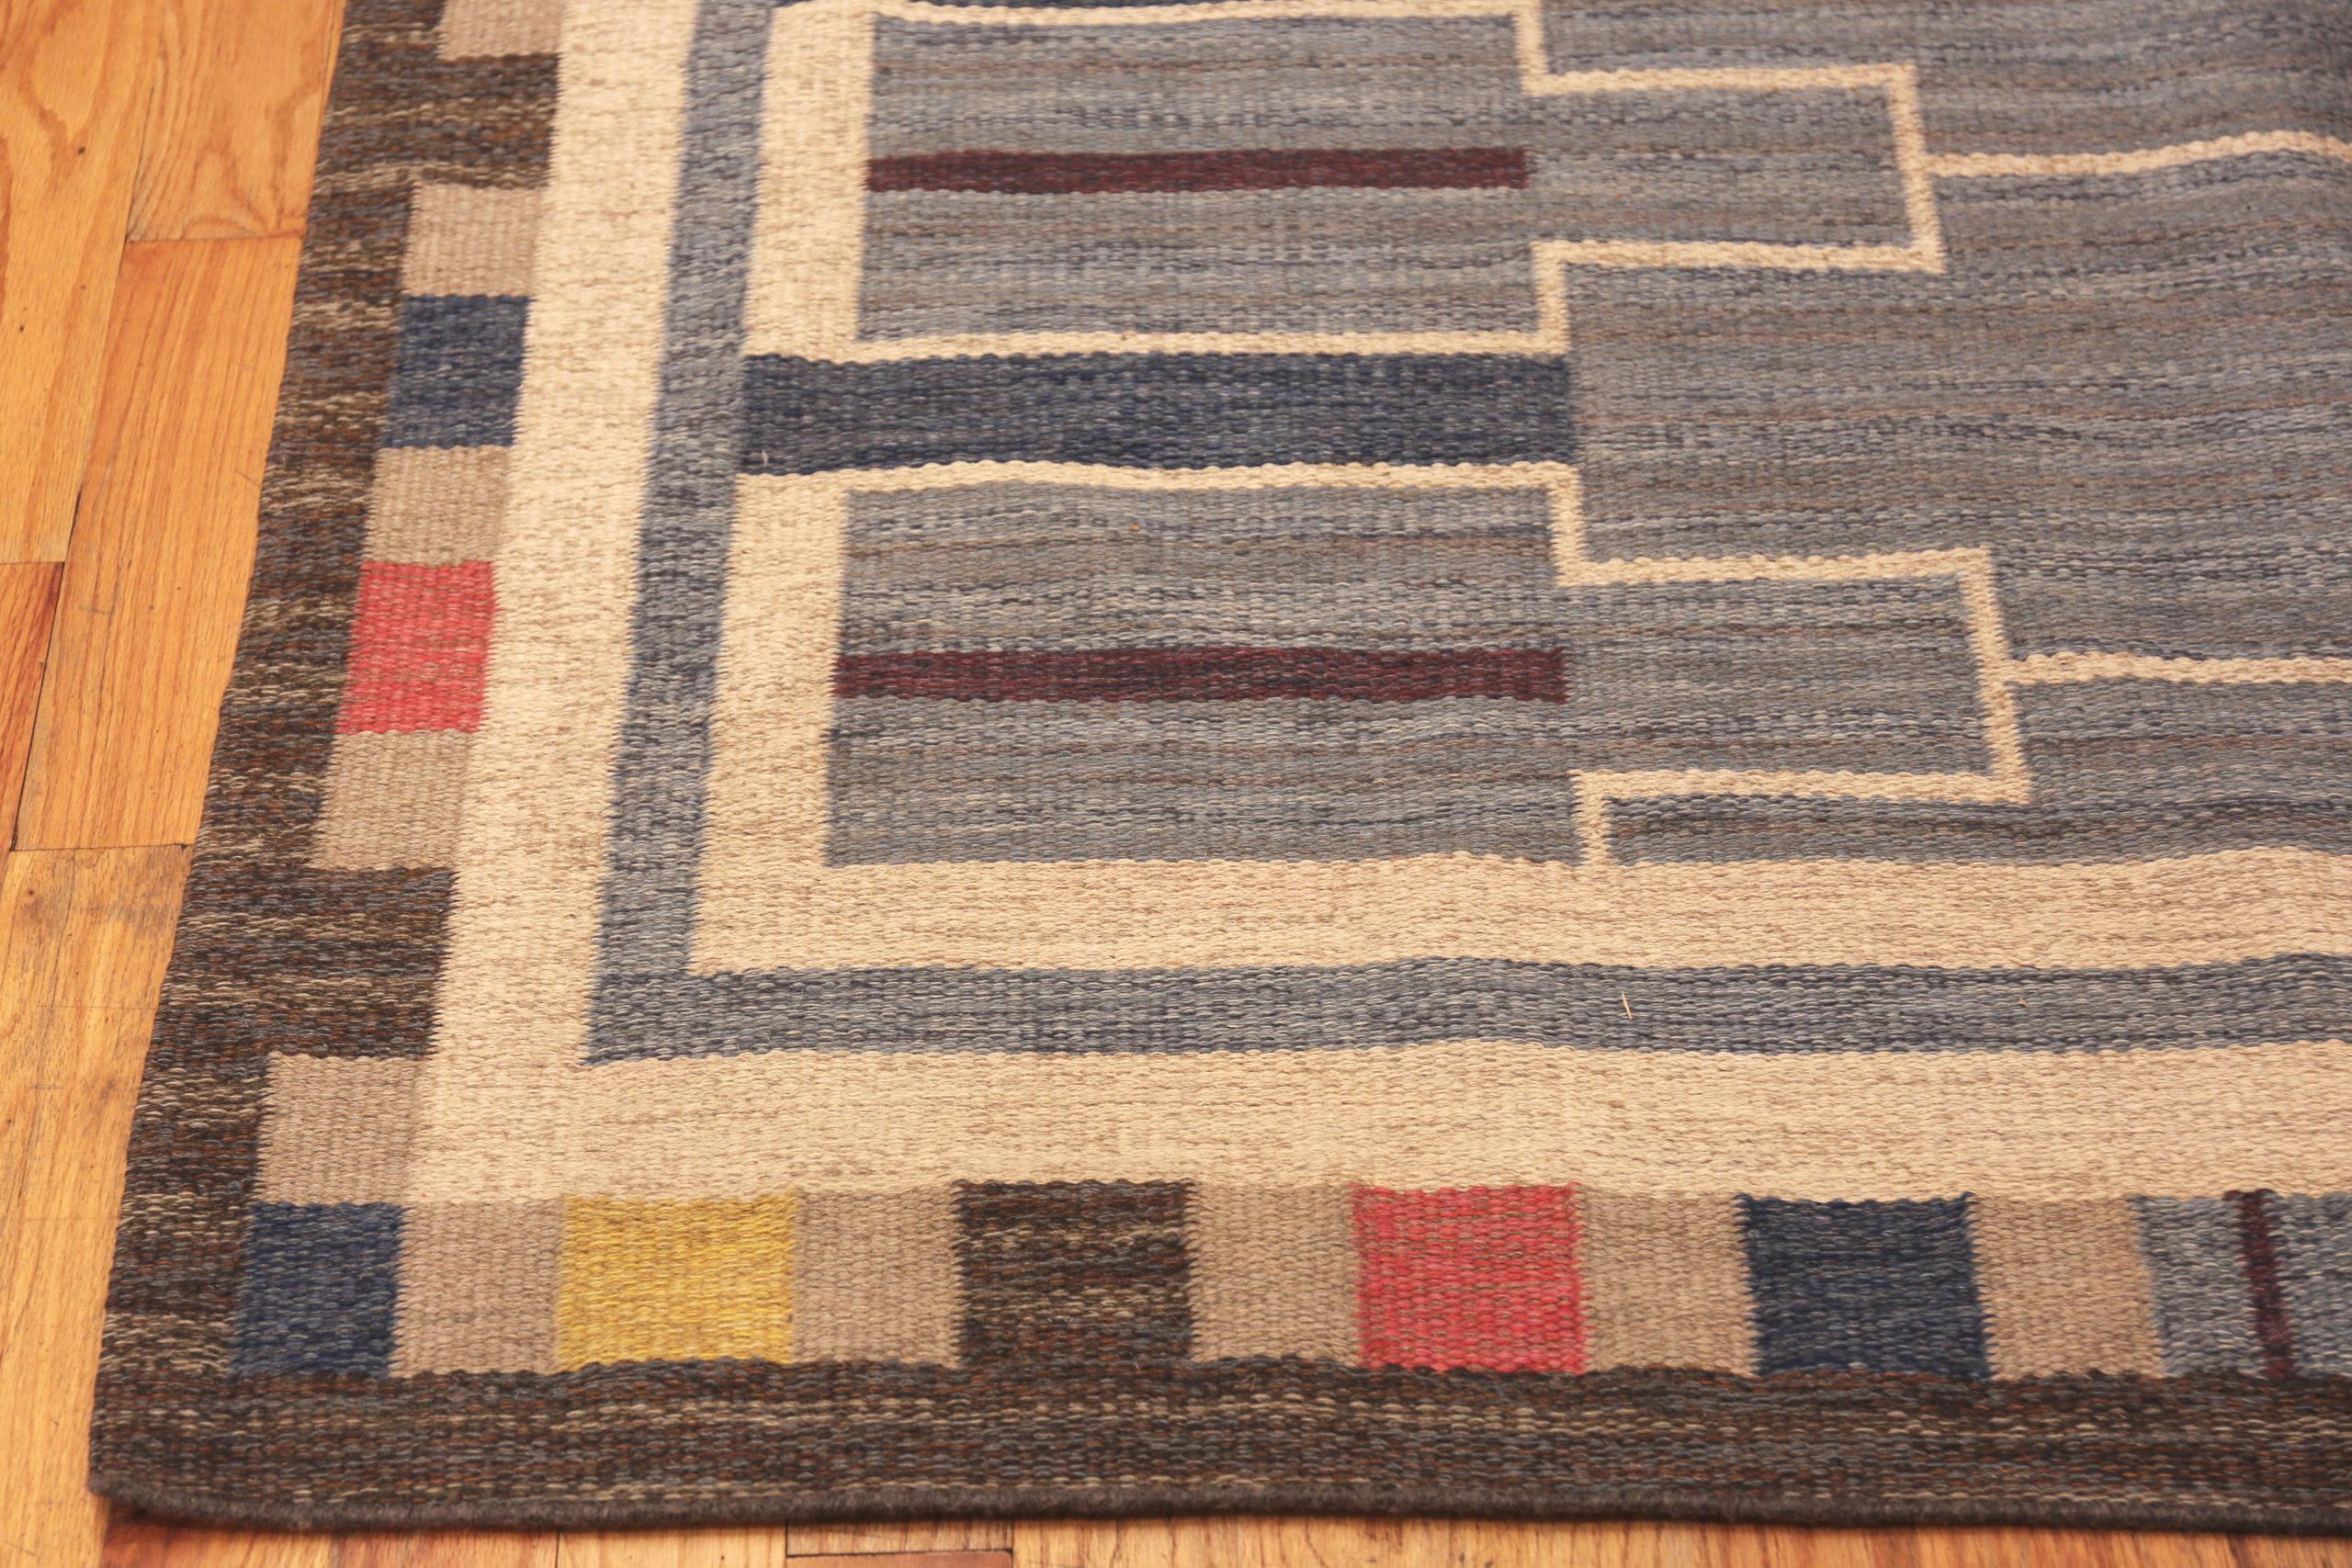 Hand-Knotted Geometric Vintage Scandinavian Swedish Kilim Rug. 6 ft 4 in x 9 ft 10 in